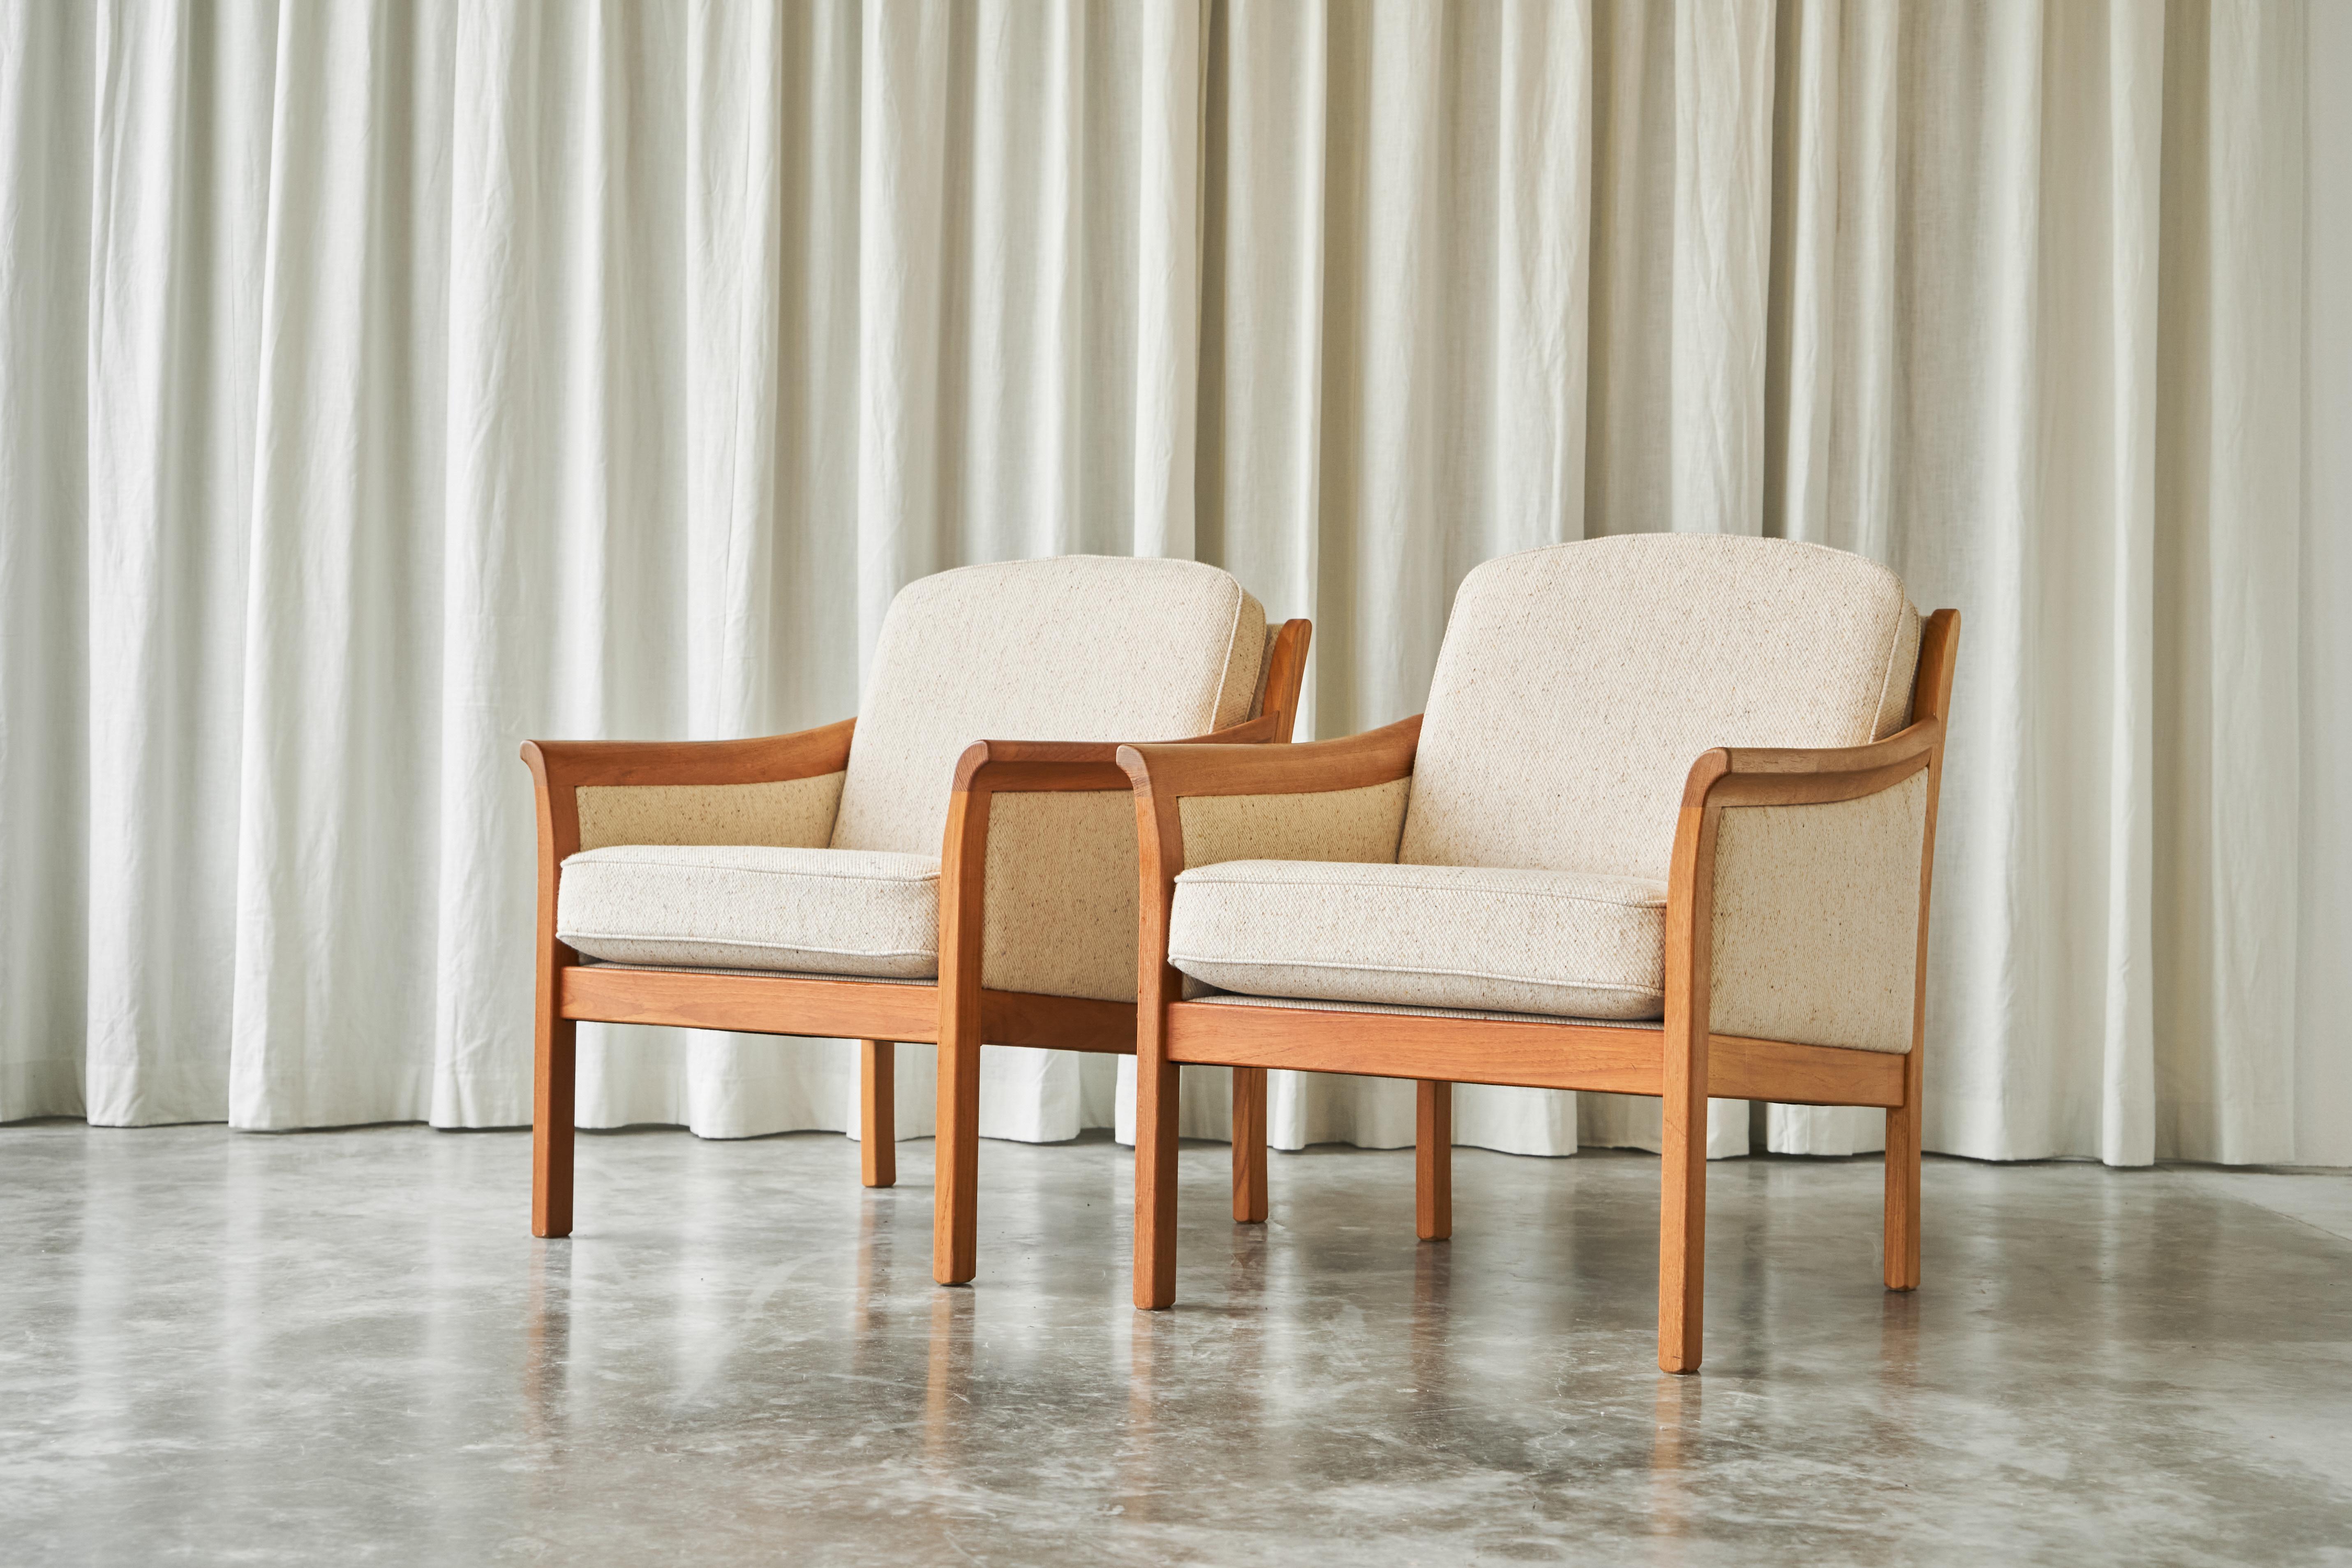 Pair of Scandinavian Lounge Chairs in Wool with one Ottoman, Scandinavia, 1960s.

This is a pair of very elegant lounge chairs from Scandinavia with one ottoman. These Scandinavian lounge chairs have been made in the middle of the 20th century and